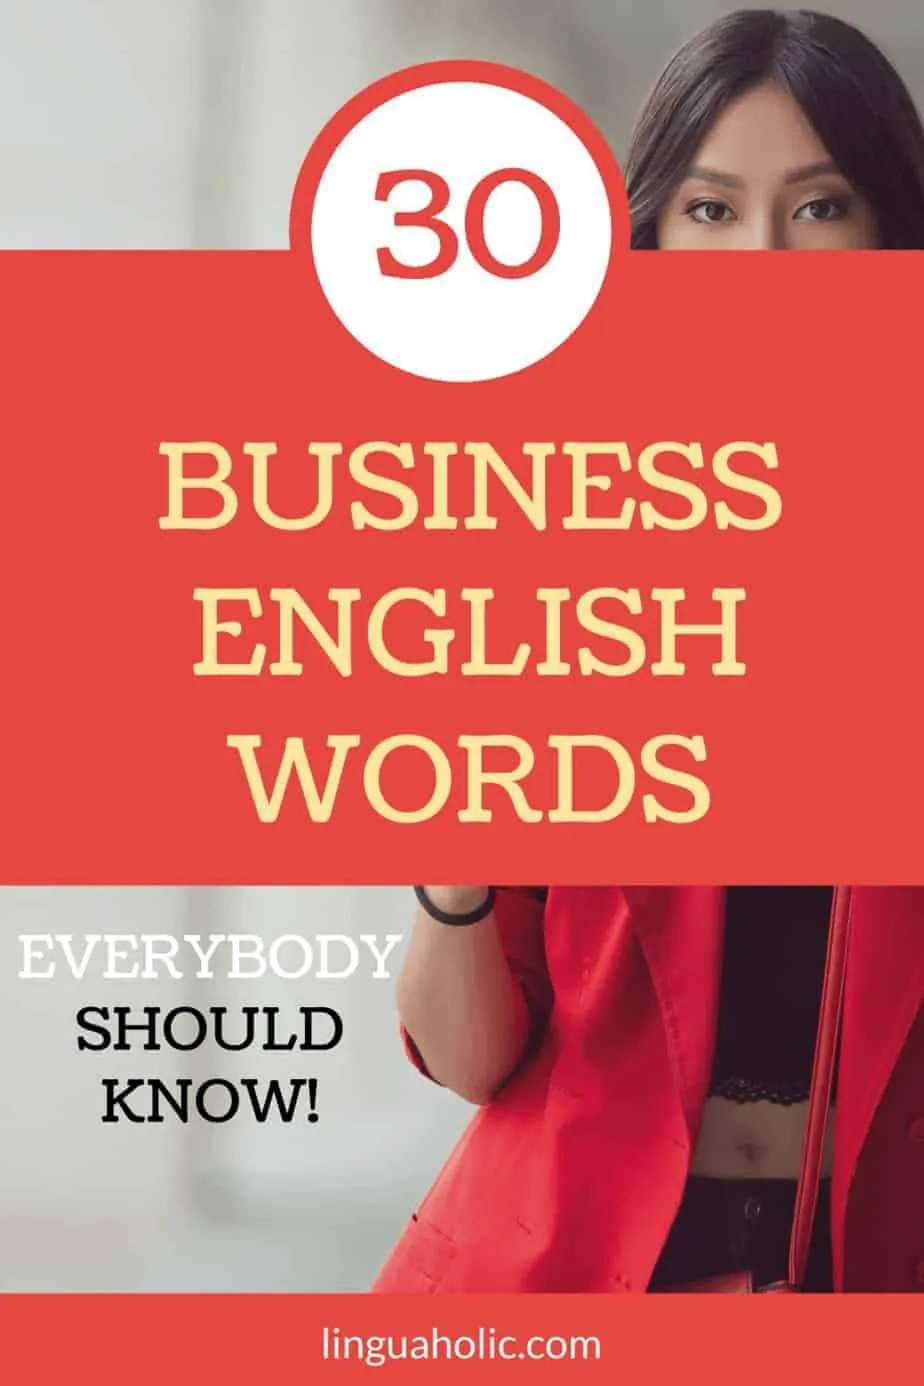 Business English Words Everybody Should Know